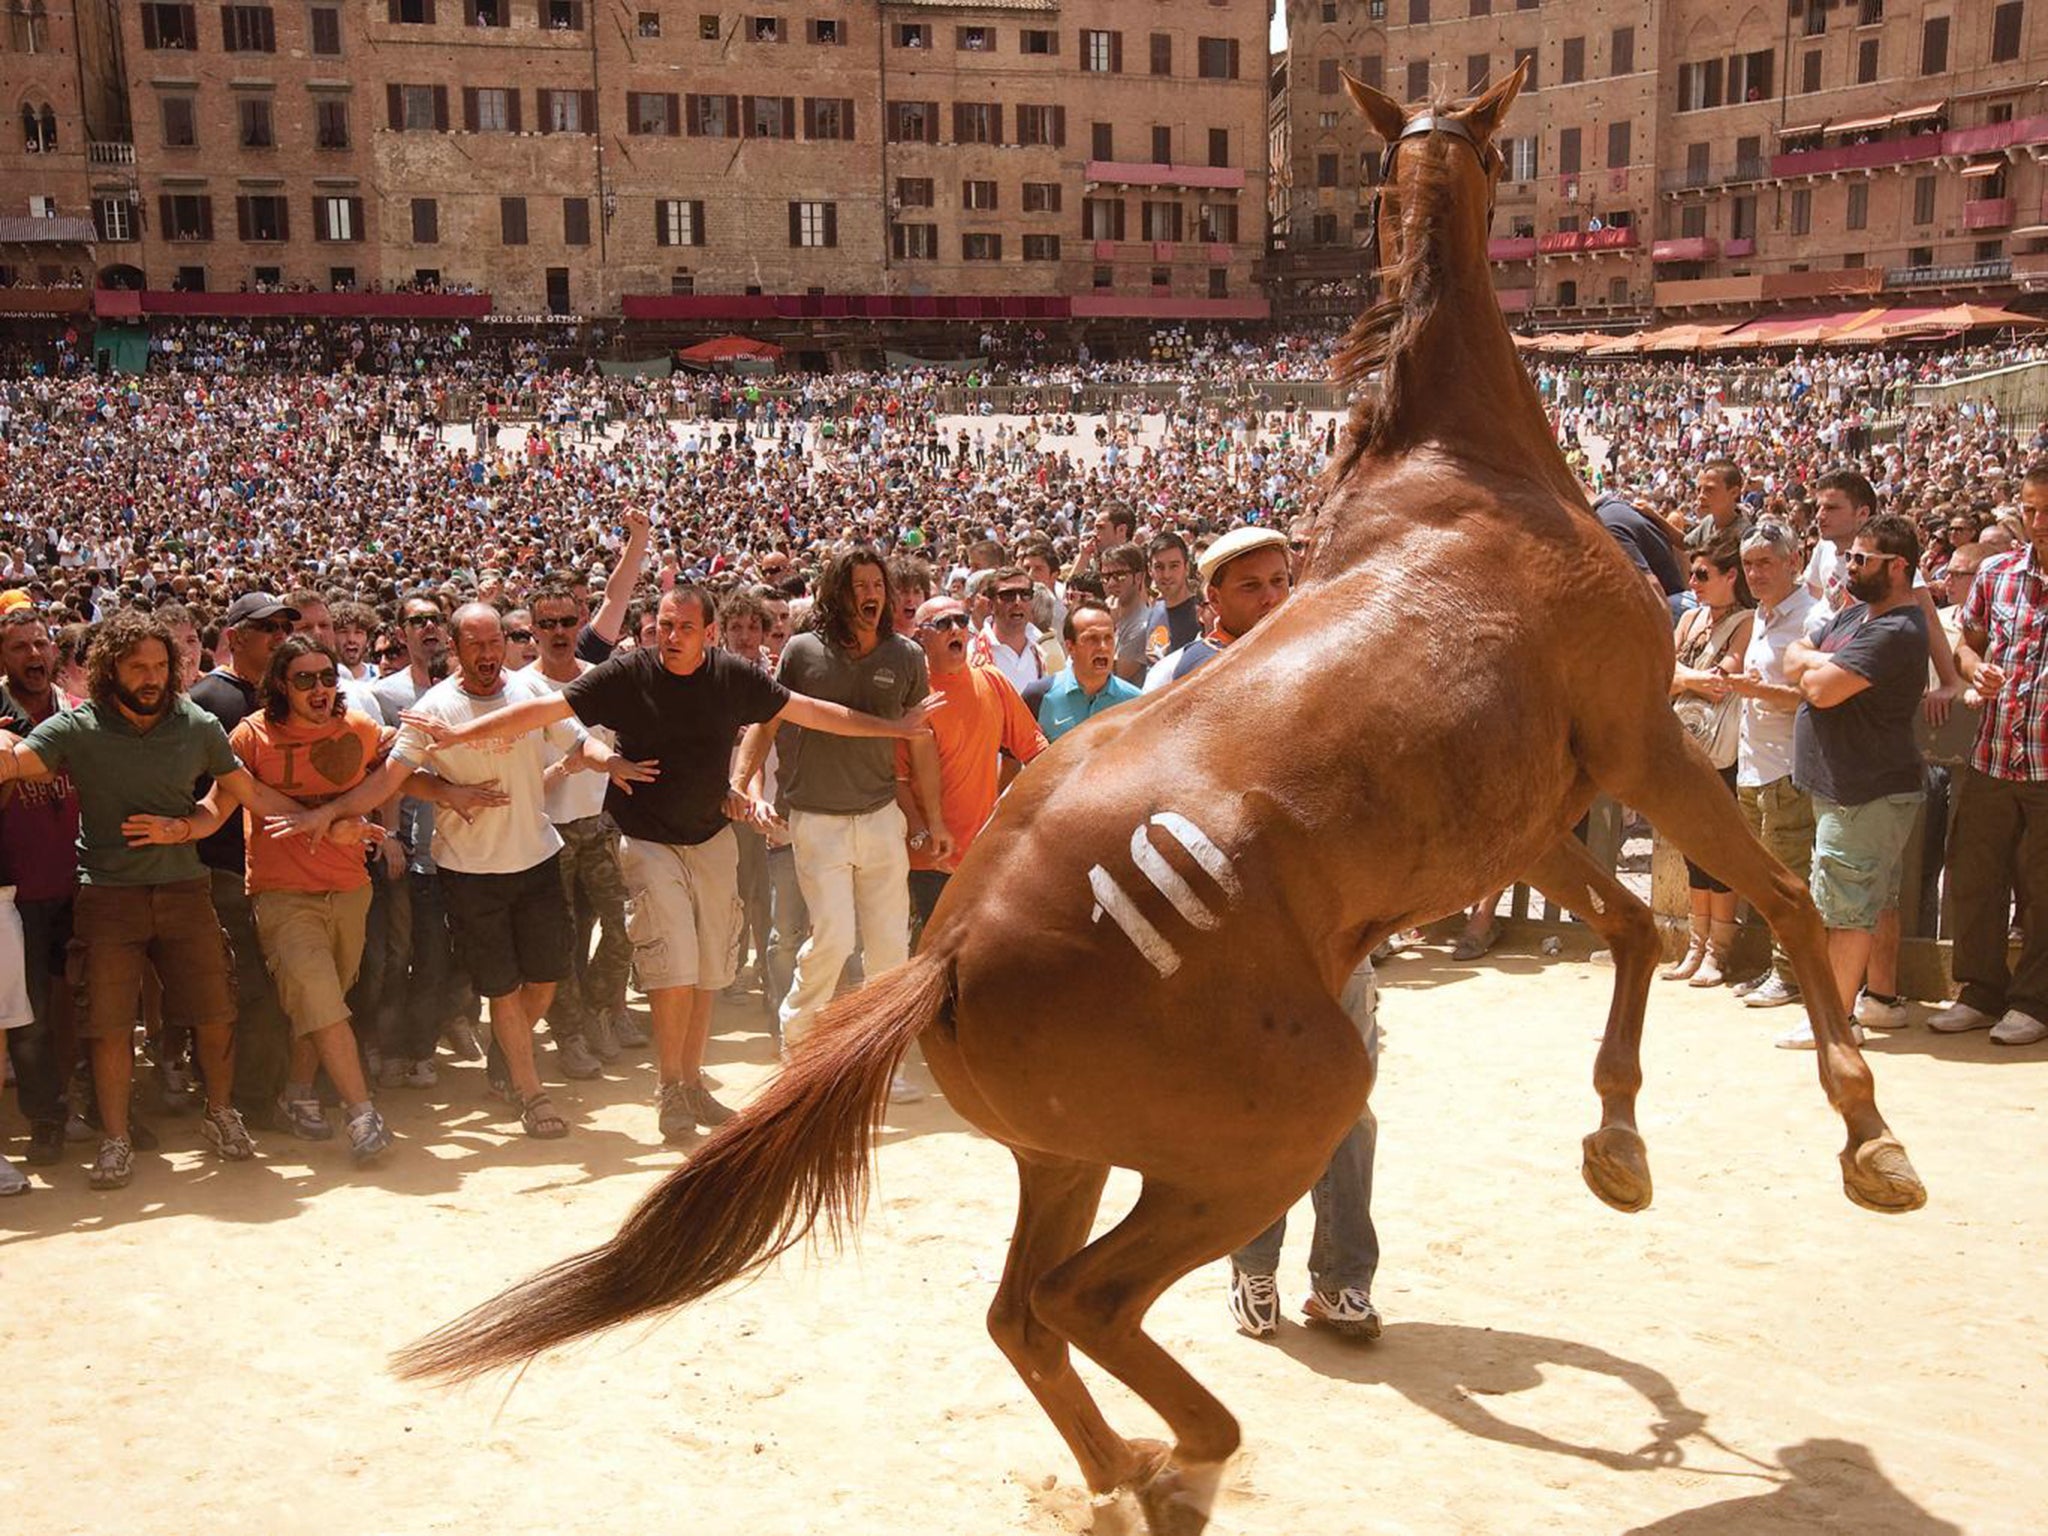 Bareback beauty: the view from Siena square in the spectacular ‘Palio’